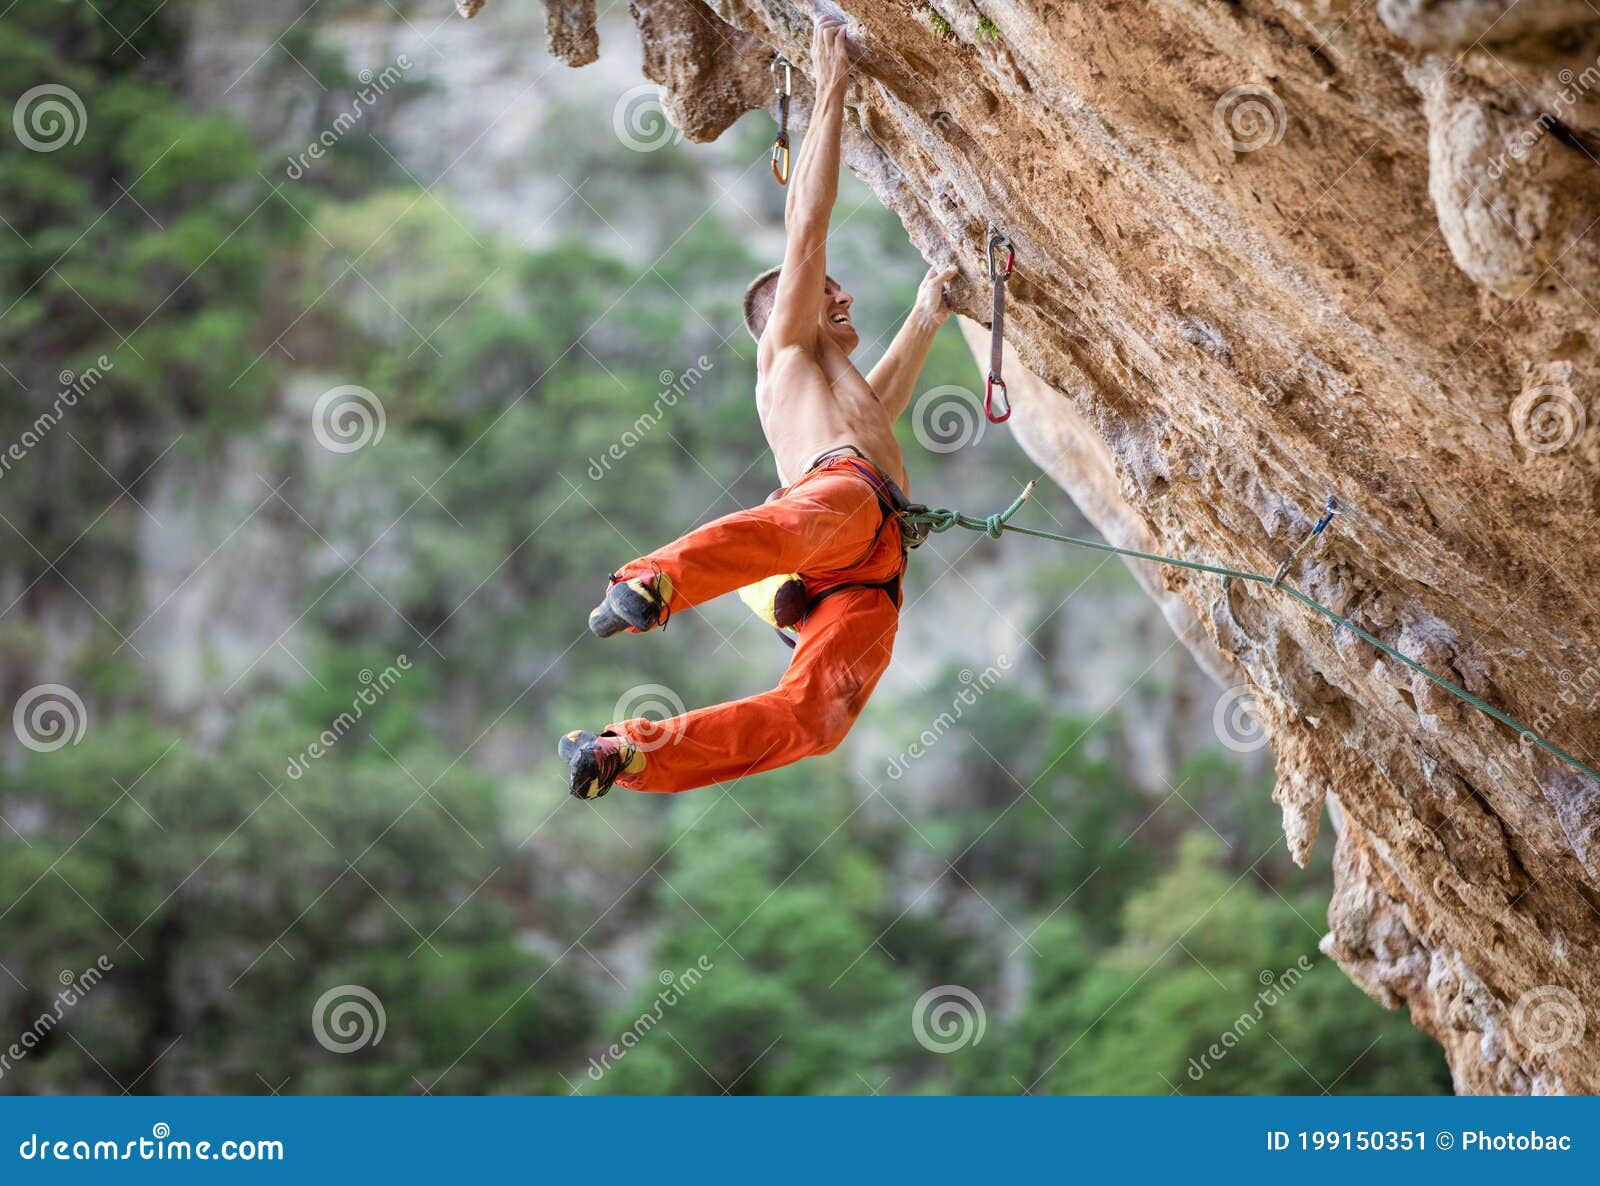 young male rock climber after jumping and gripping small handholds